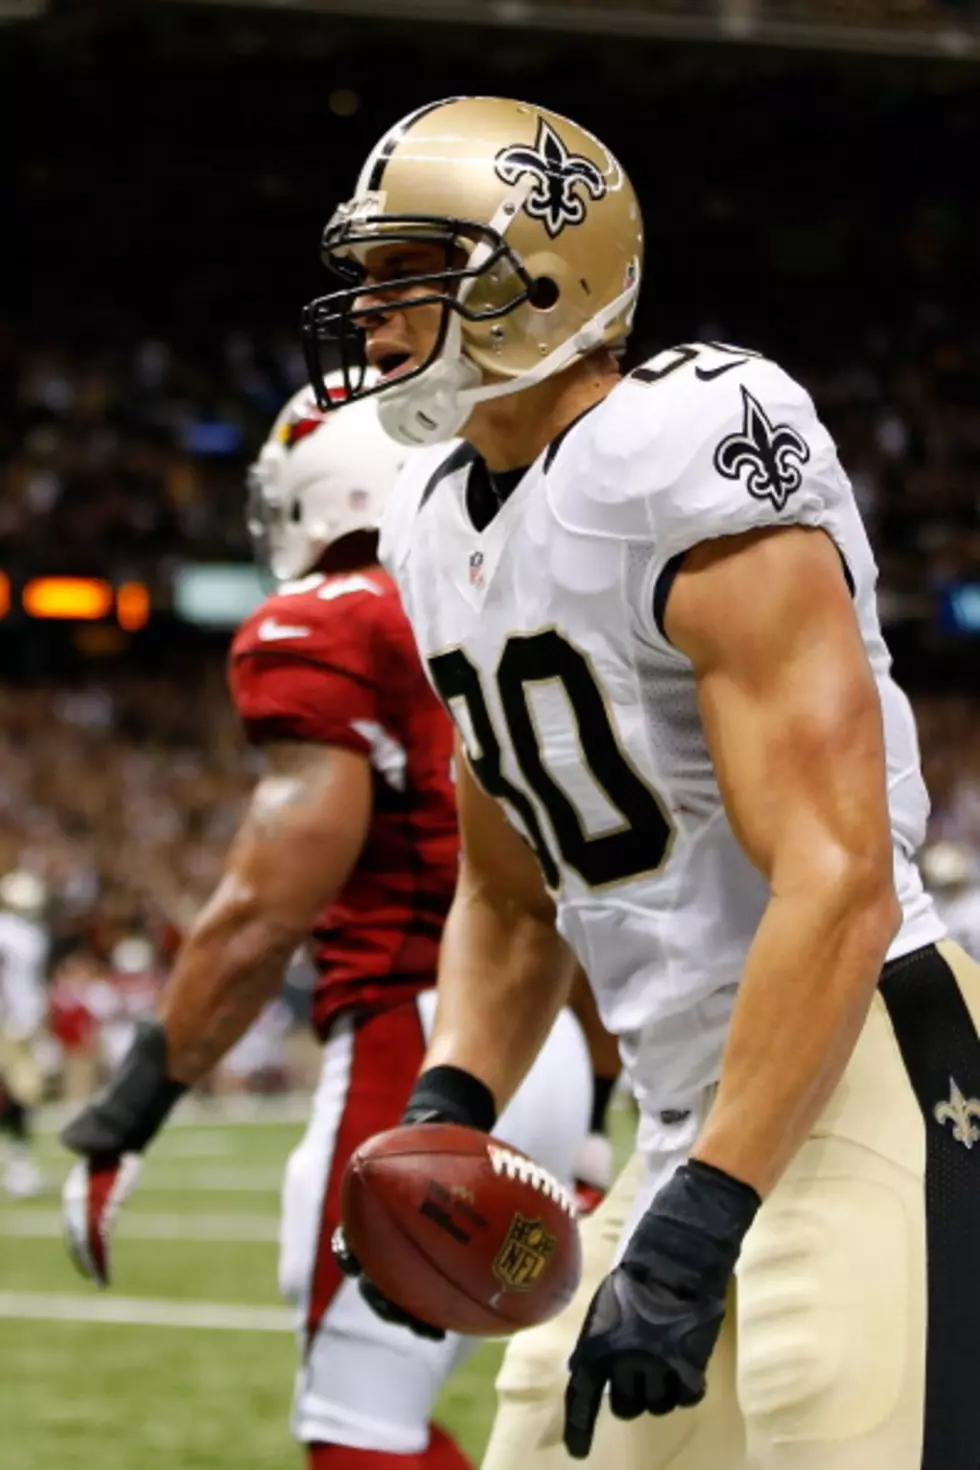 Jimmy Graham Ruled Tight End, Saints Gain Upper Hand In Negotiations